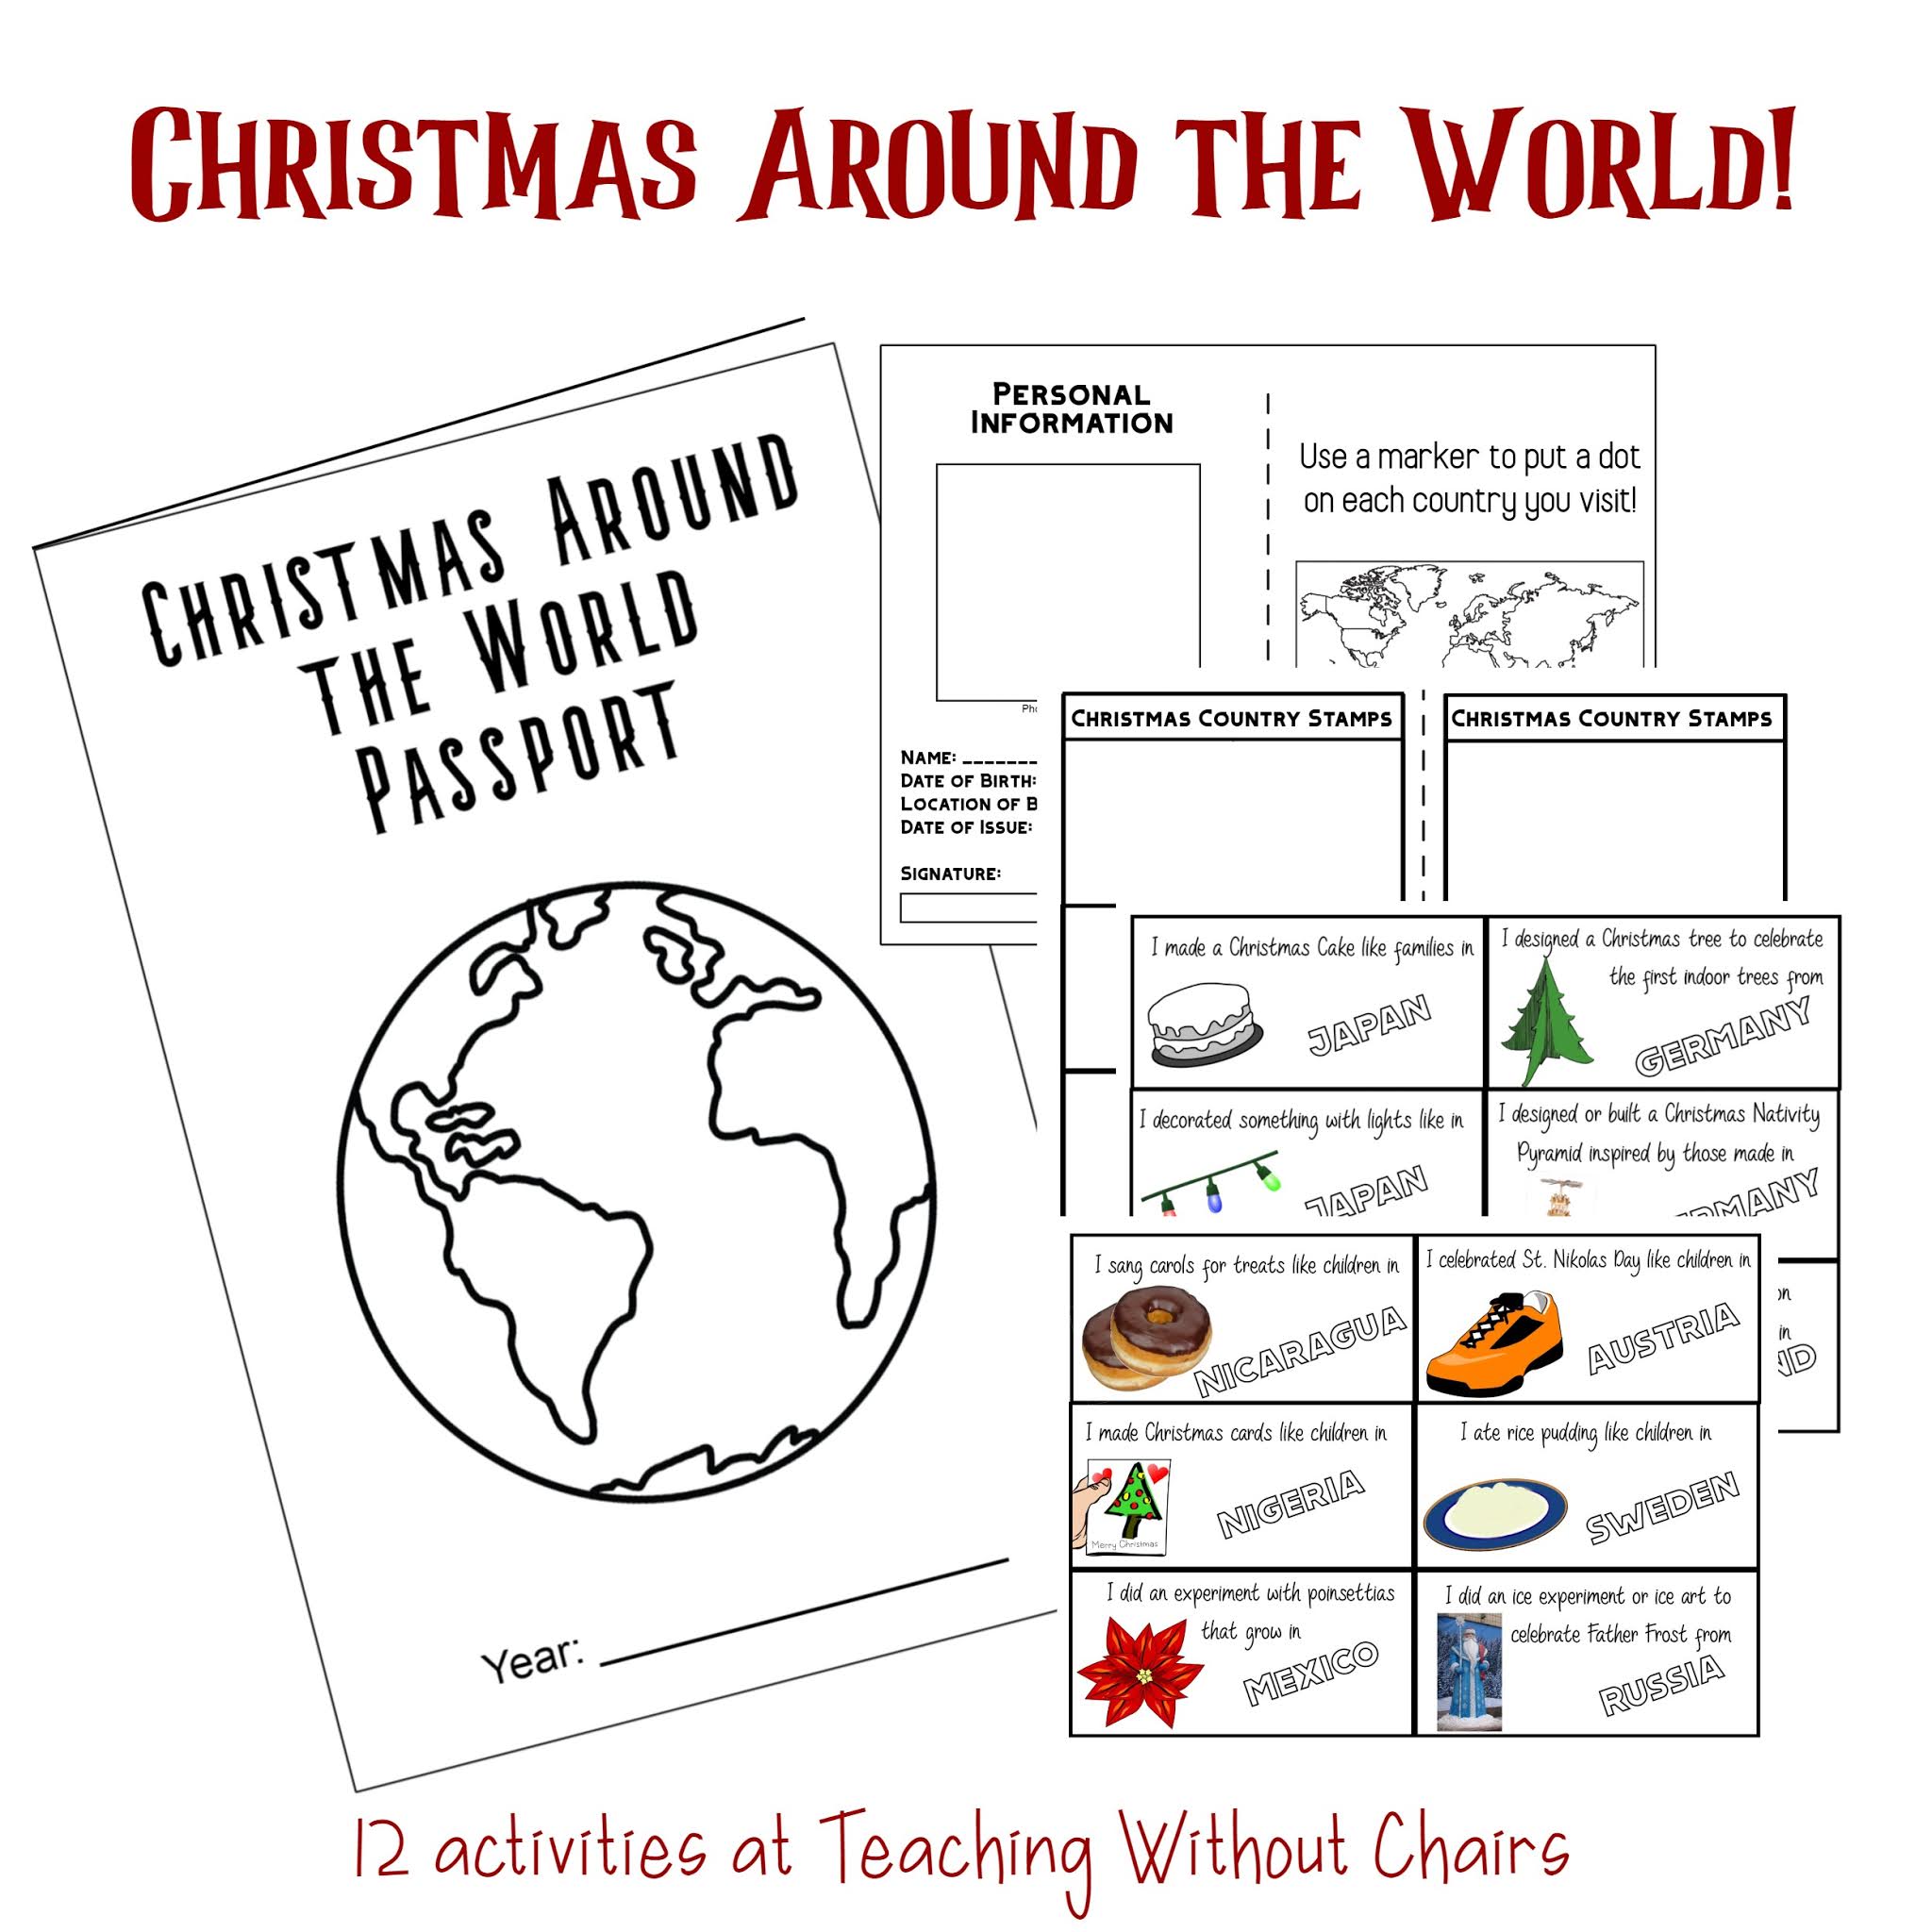 christmas-around-the-world-for-kids-activities-homeschooling-fun-through-the-holidays